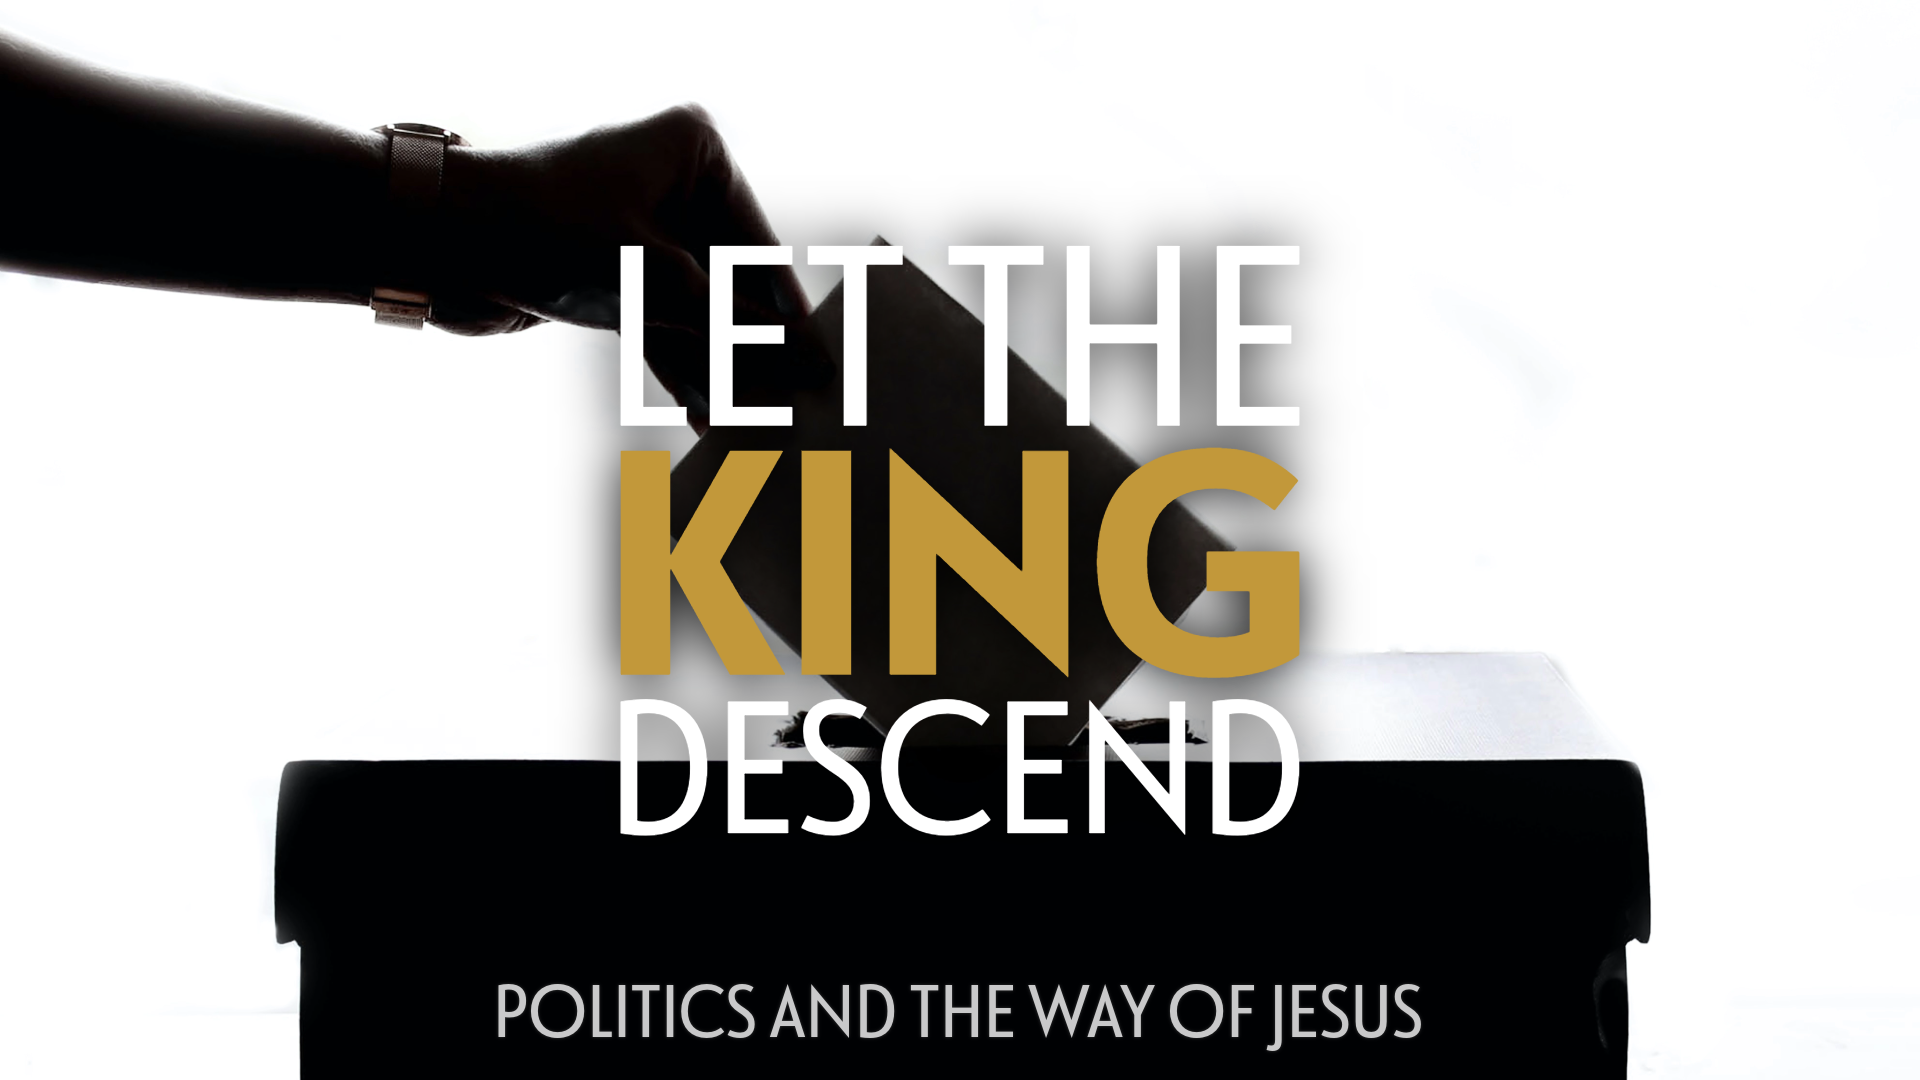 Let The King Descend: Idolatry and Politics